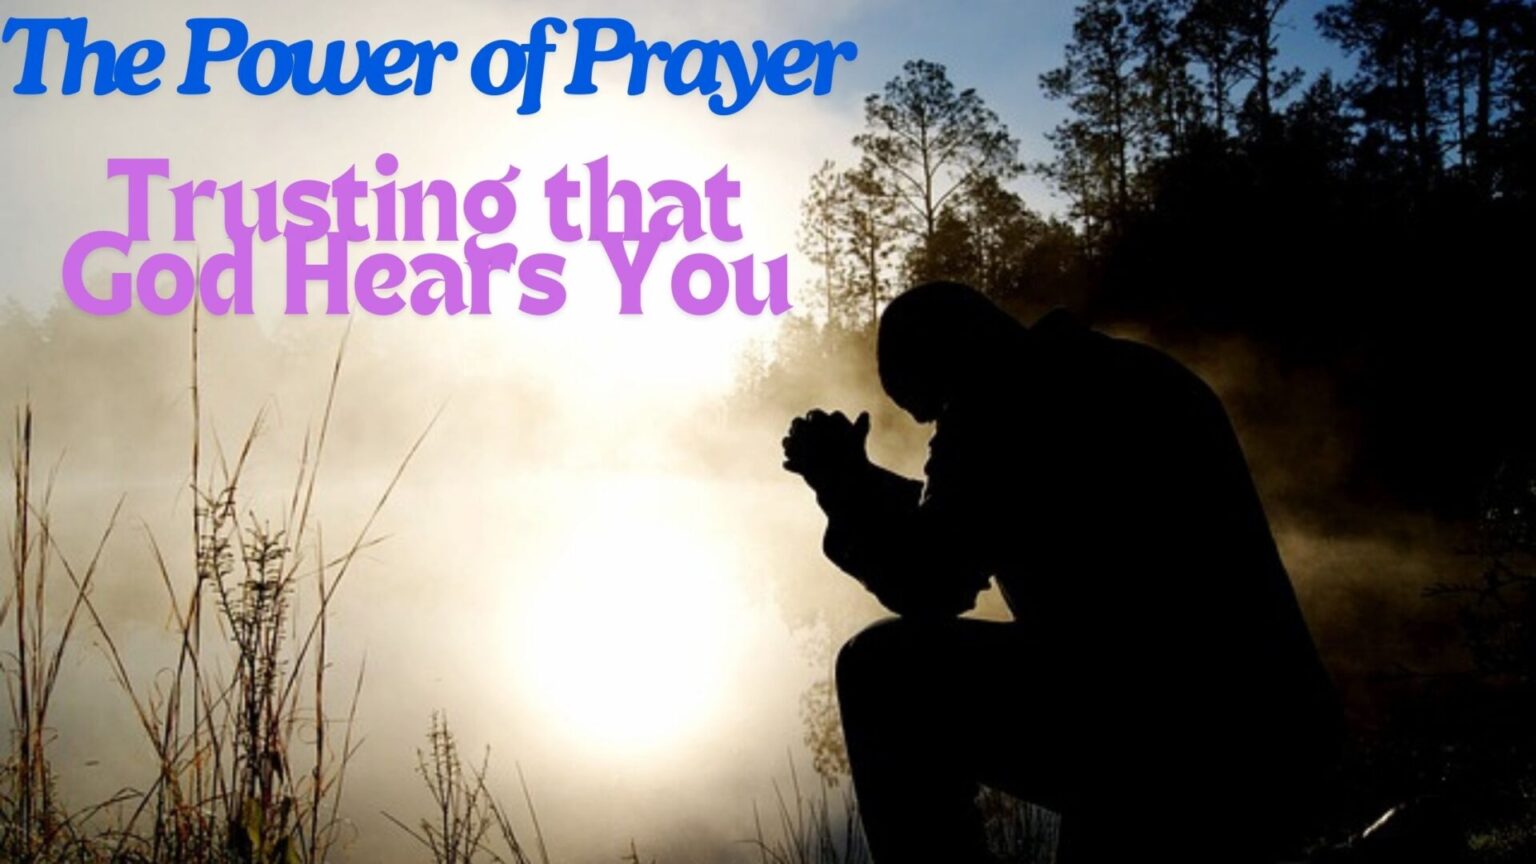 The Power of Prayer: Trusting that God Hears You